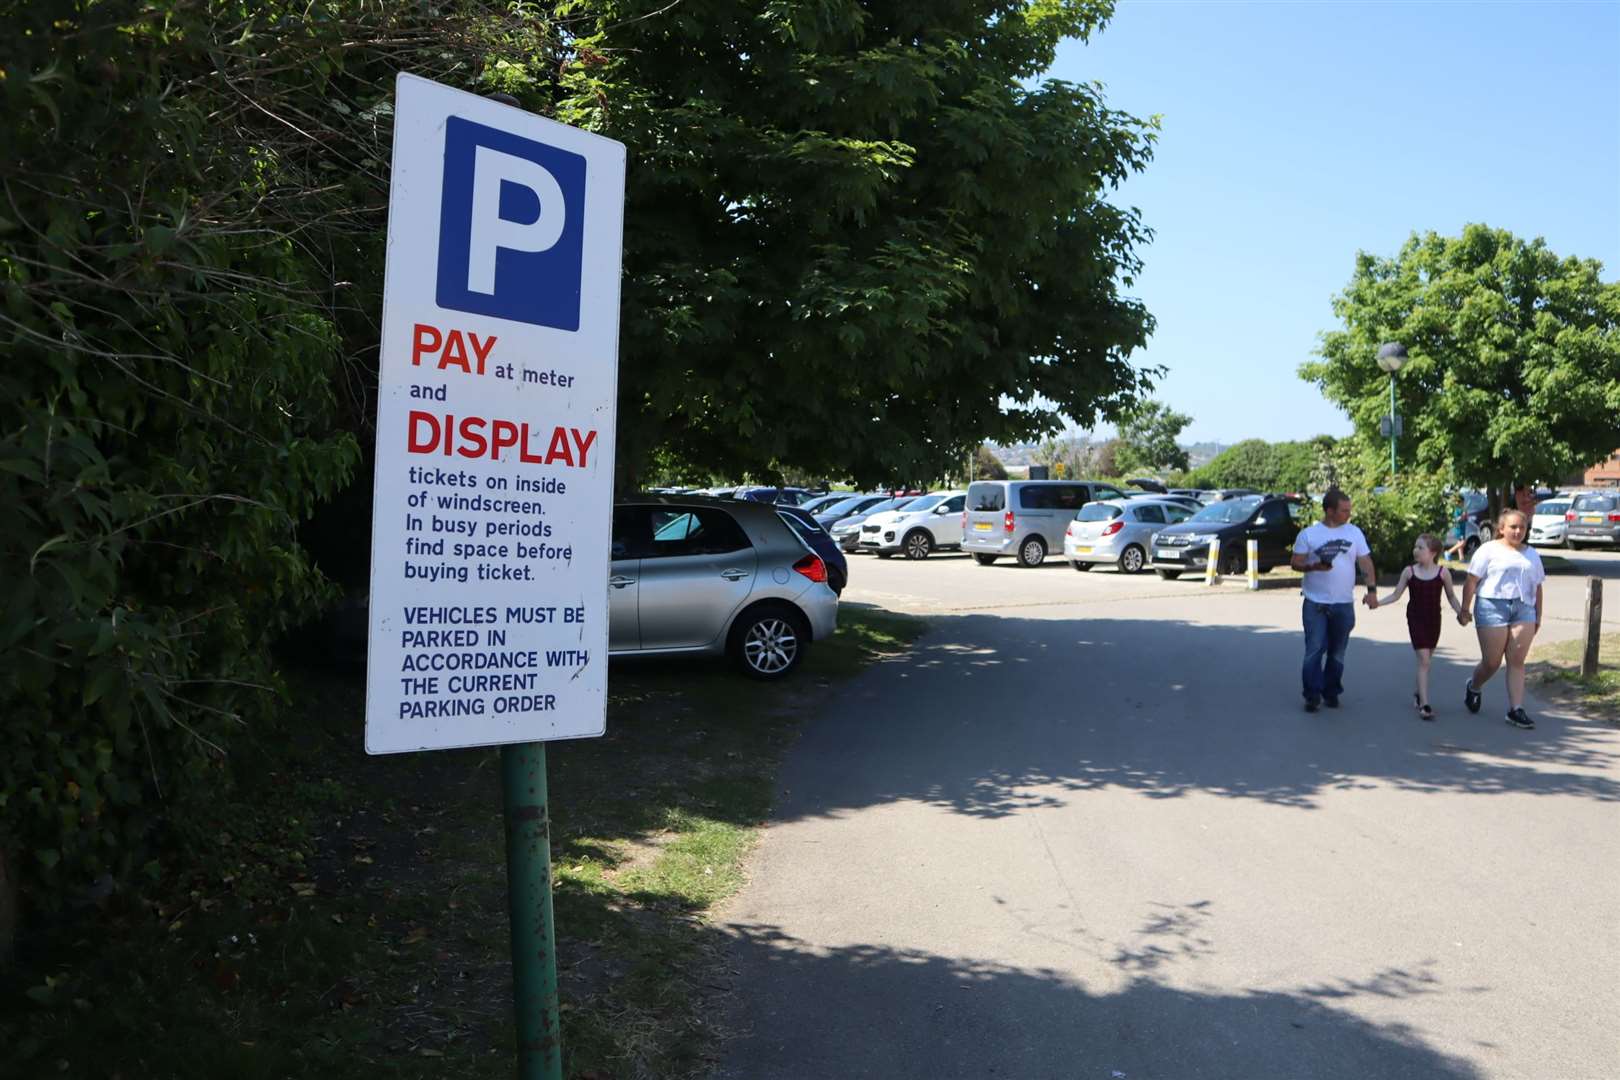 Parking is £3.40 for all day at Leysdown